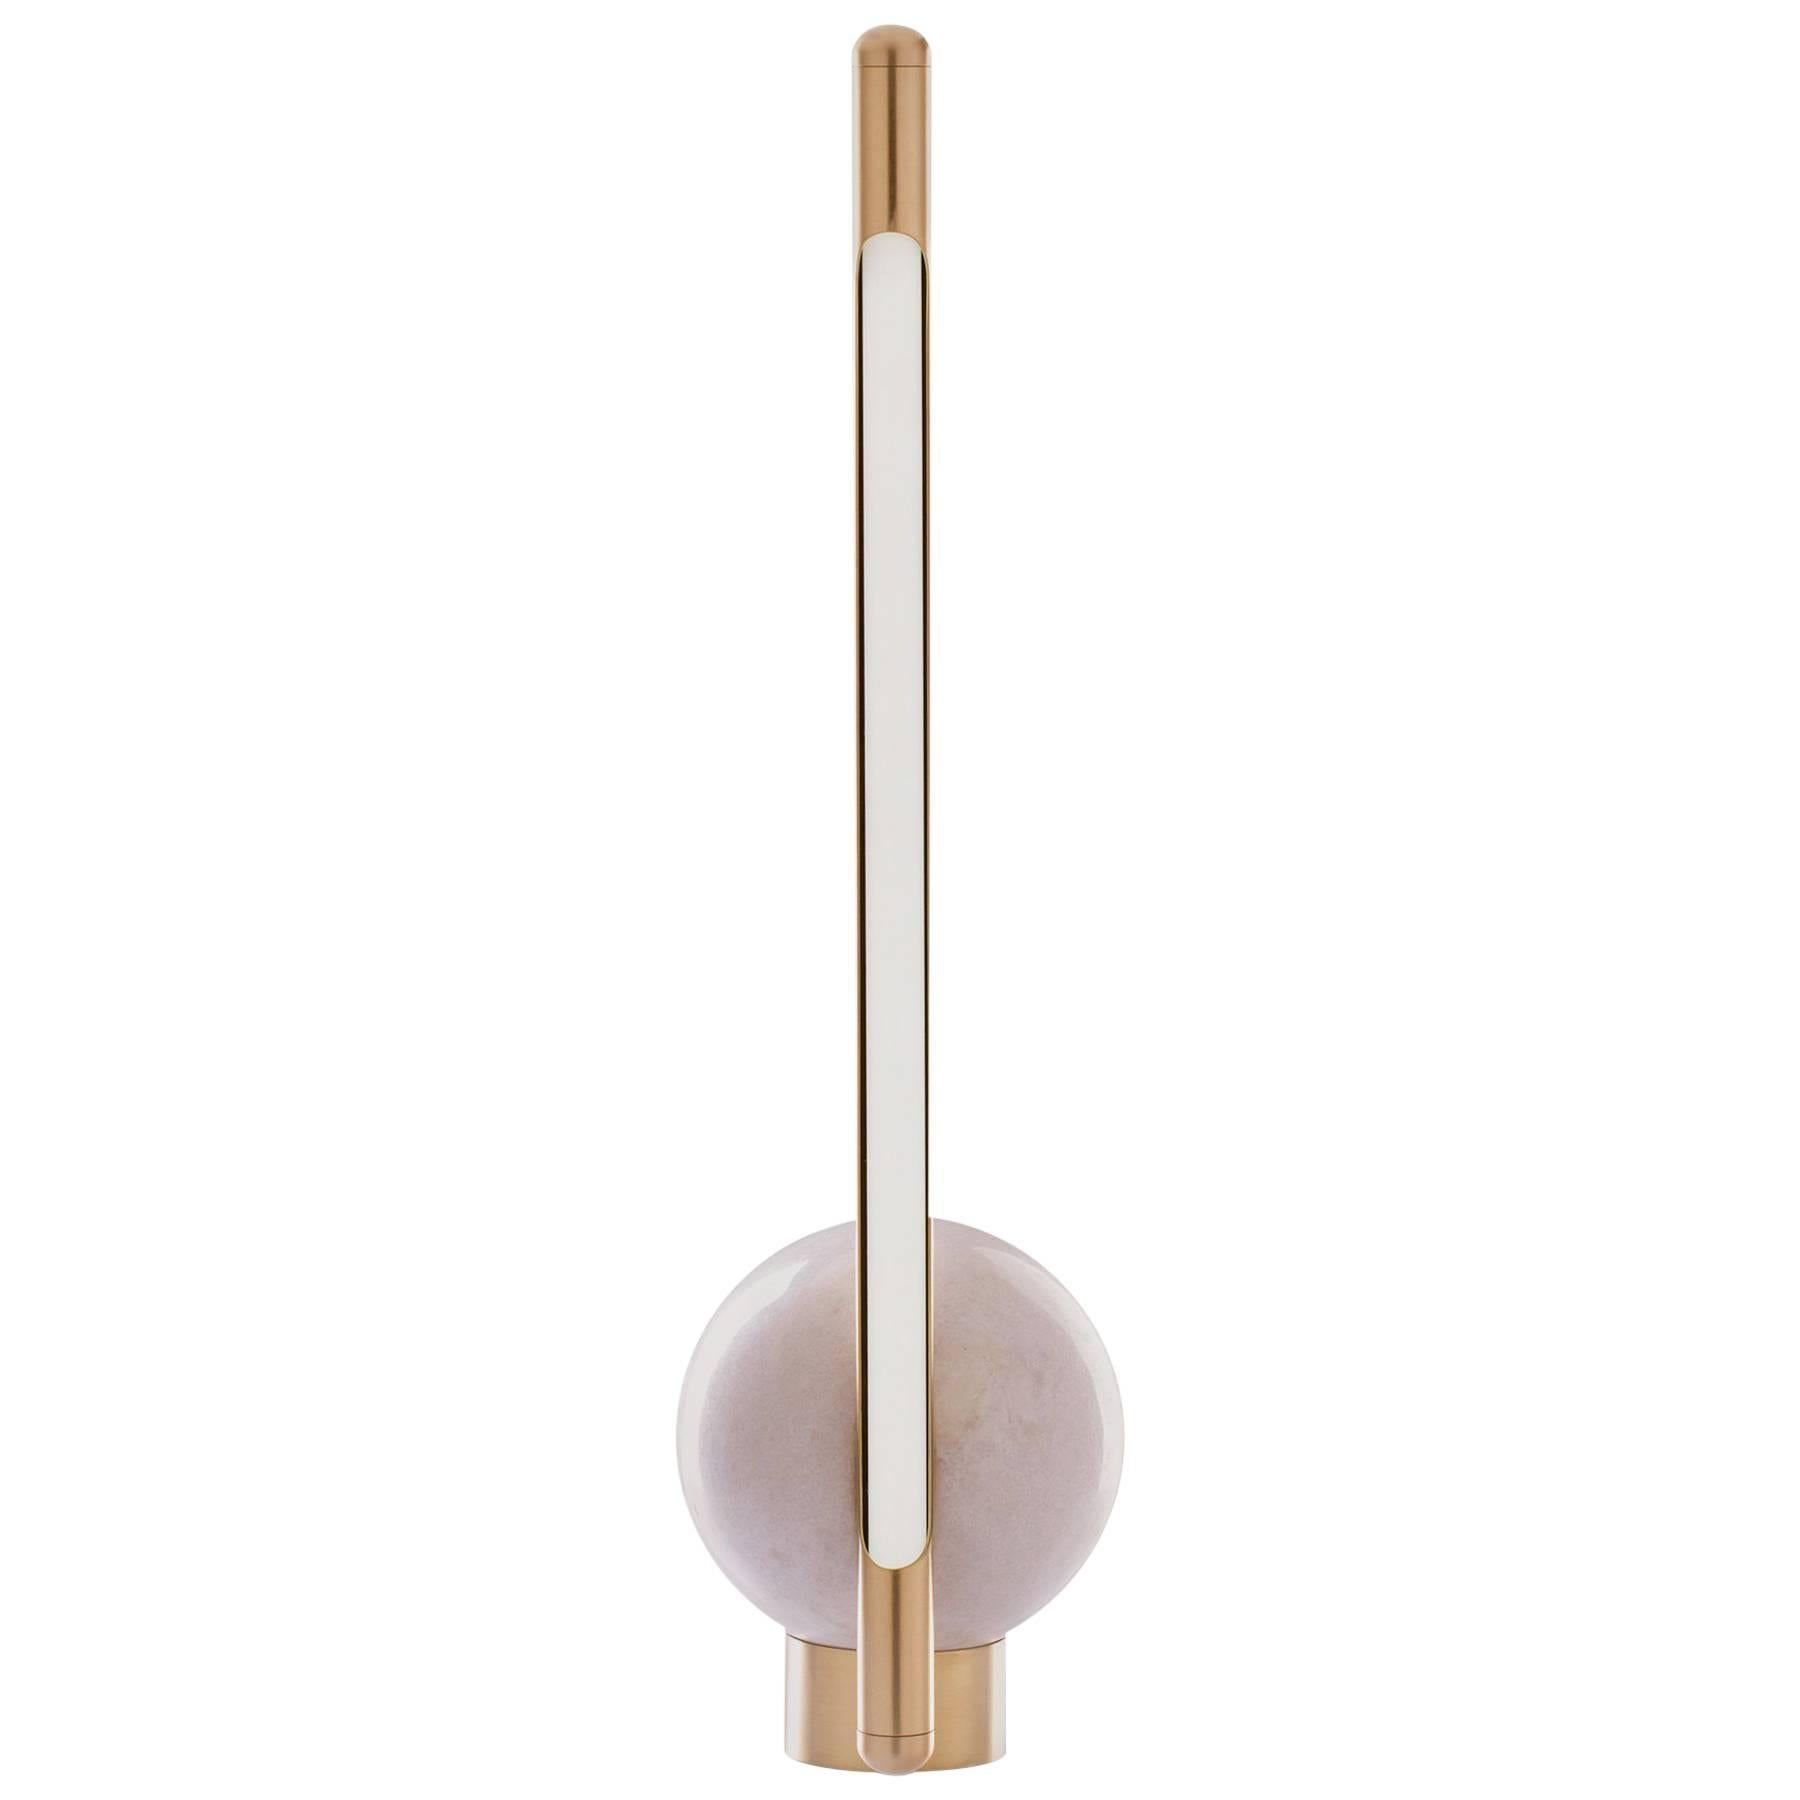 Table Lamp in Marble and Copper, Brazilian Contemporary Style, by Tiago Curioni For Sale